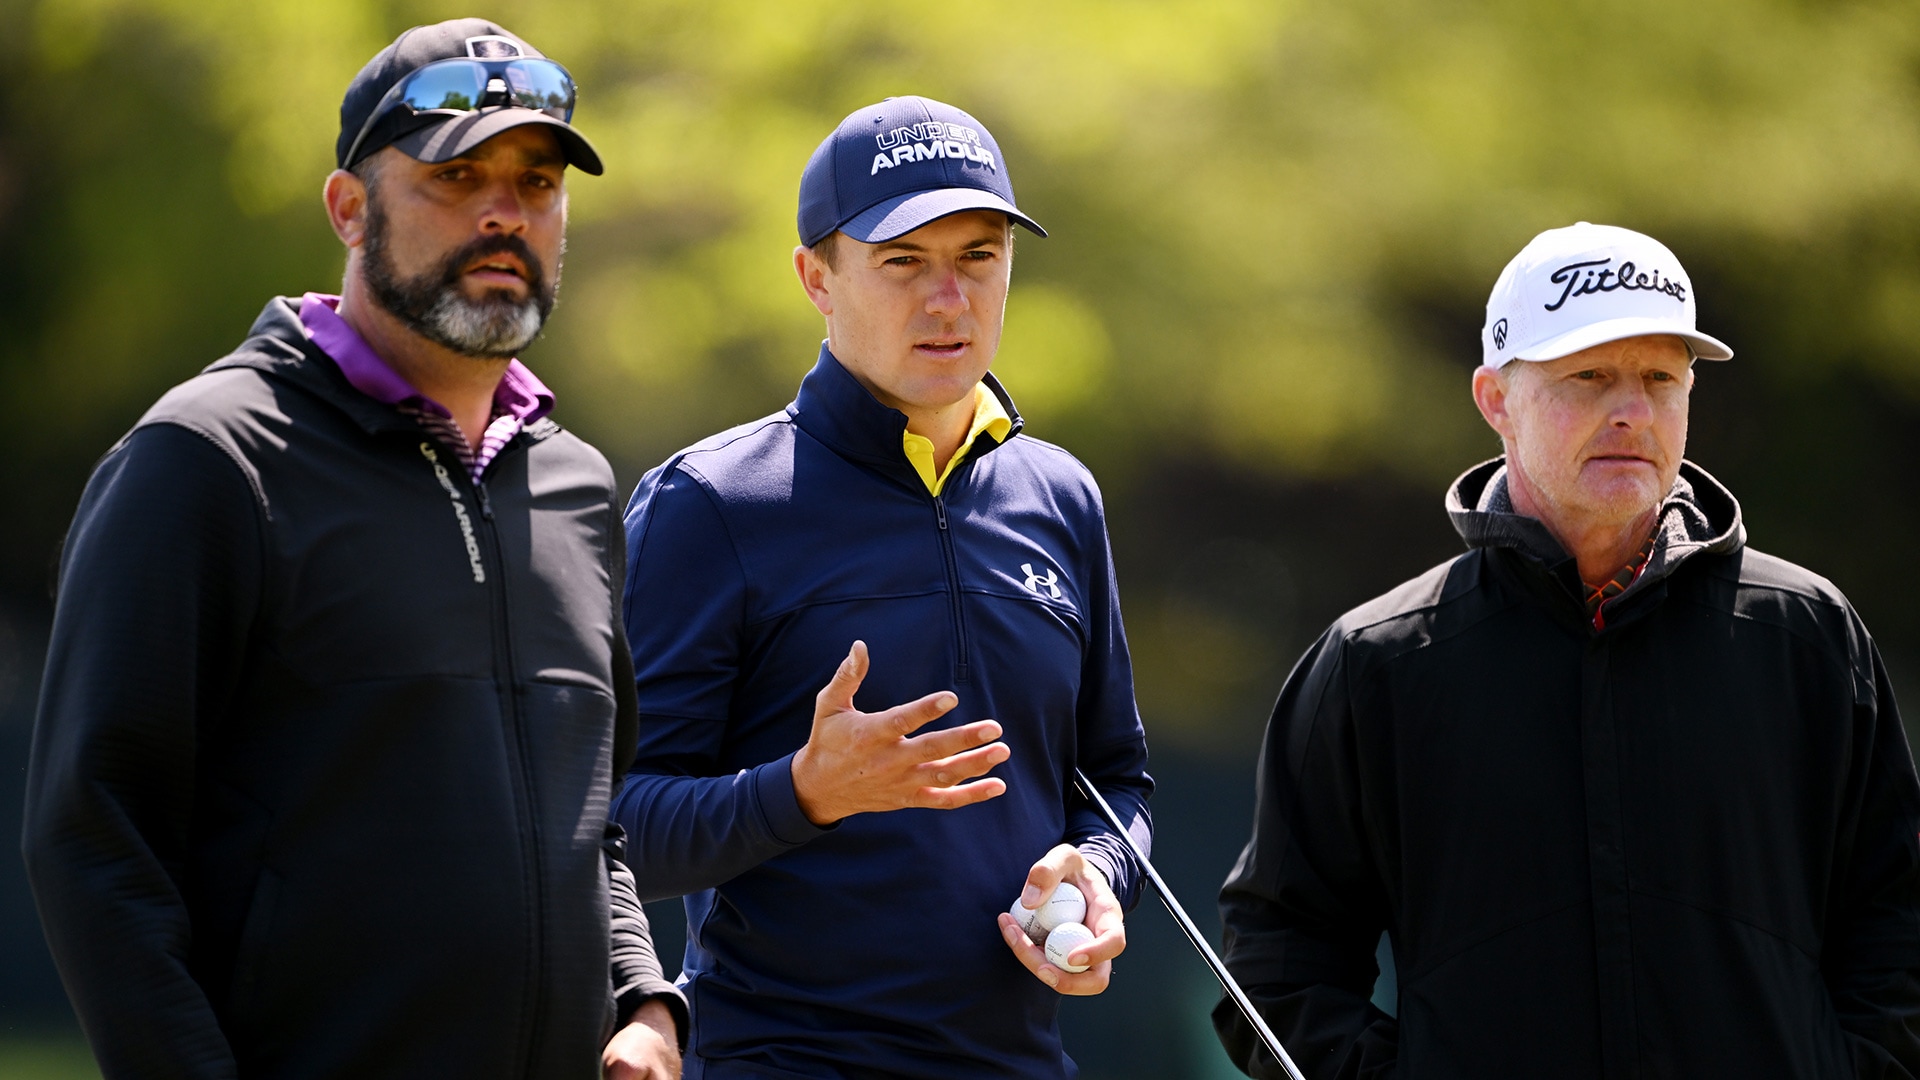 2023 PGA: After stem cell, laser and cold therapies, Jordan Spieth feels wrist up to challenge